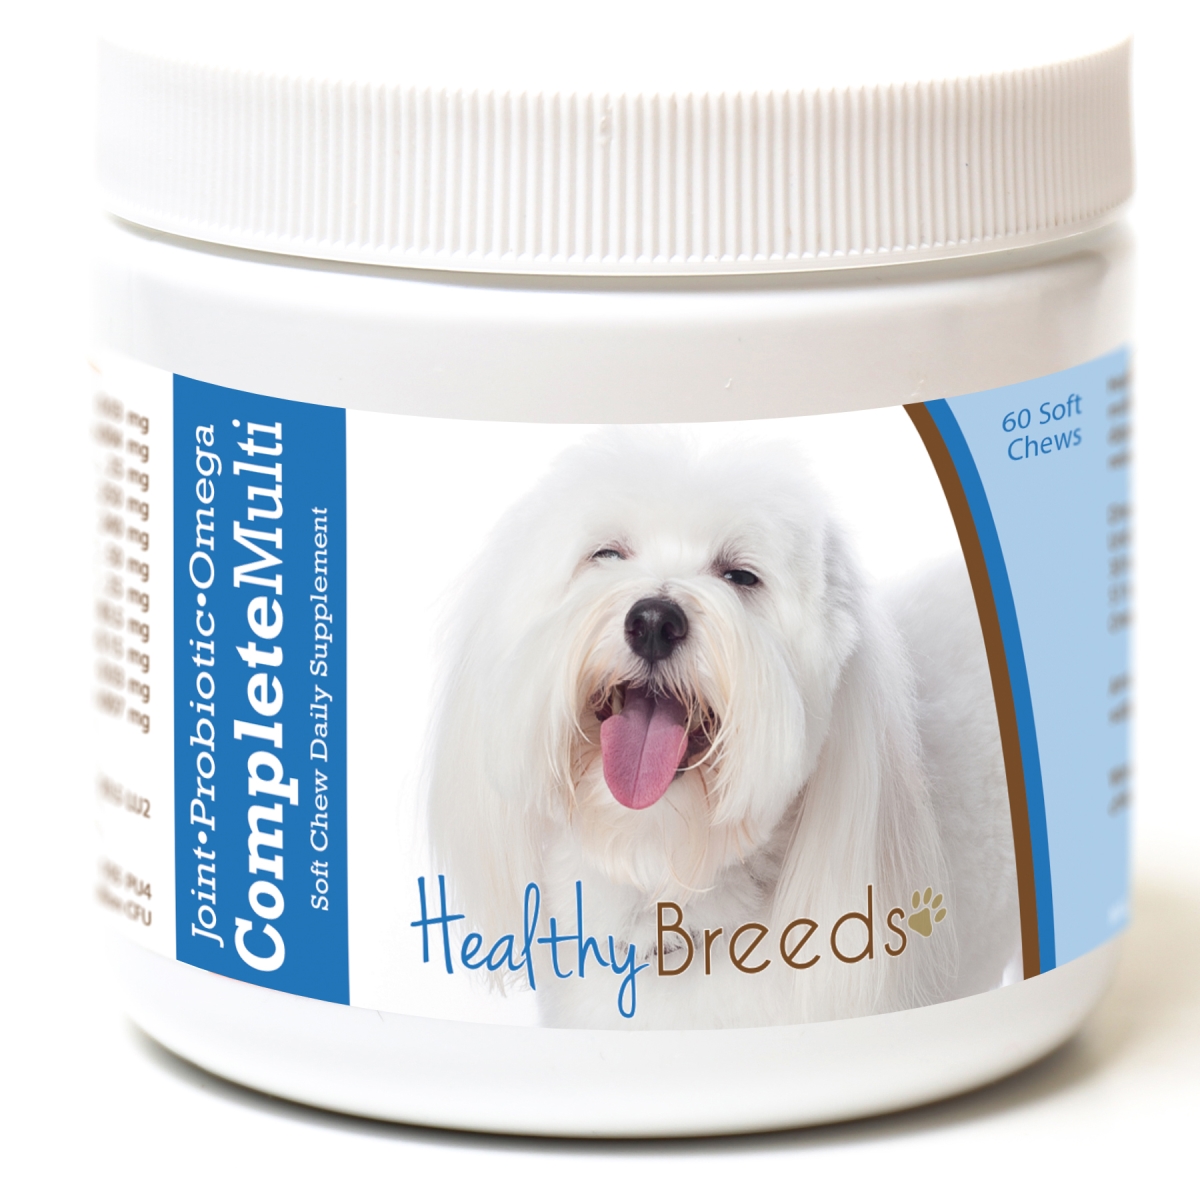 Picture of Healthy Breeds 192959007770 Coton de Tulear All in One Multivitamin Soft Chew - 60 Count